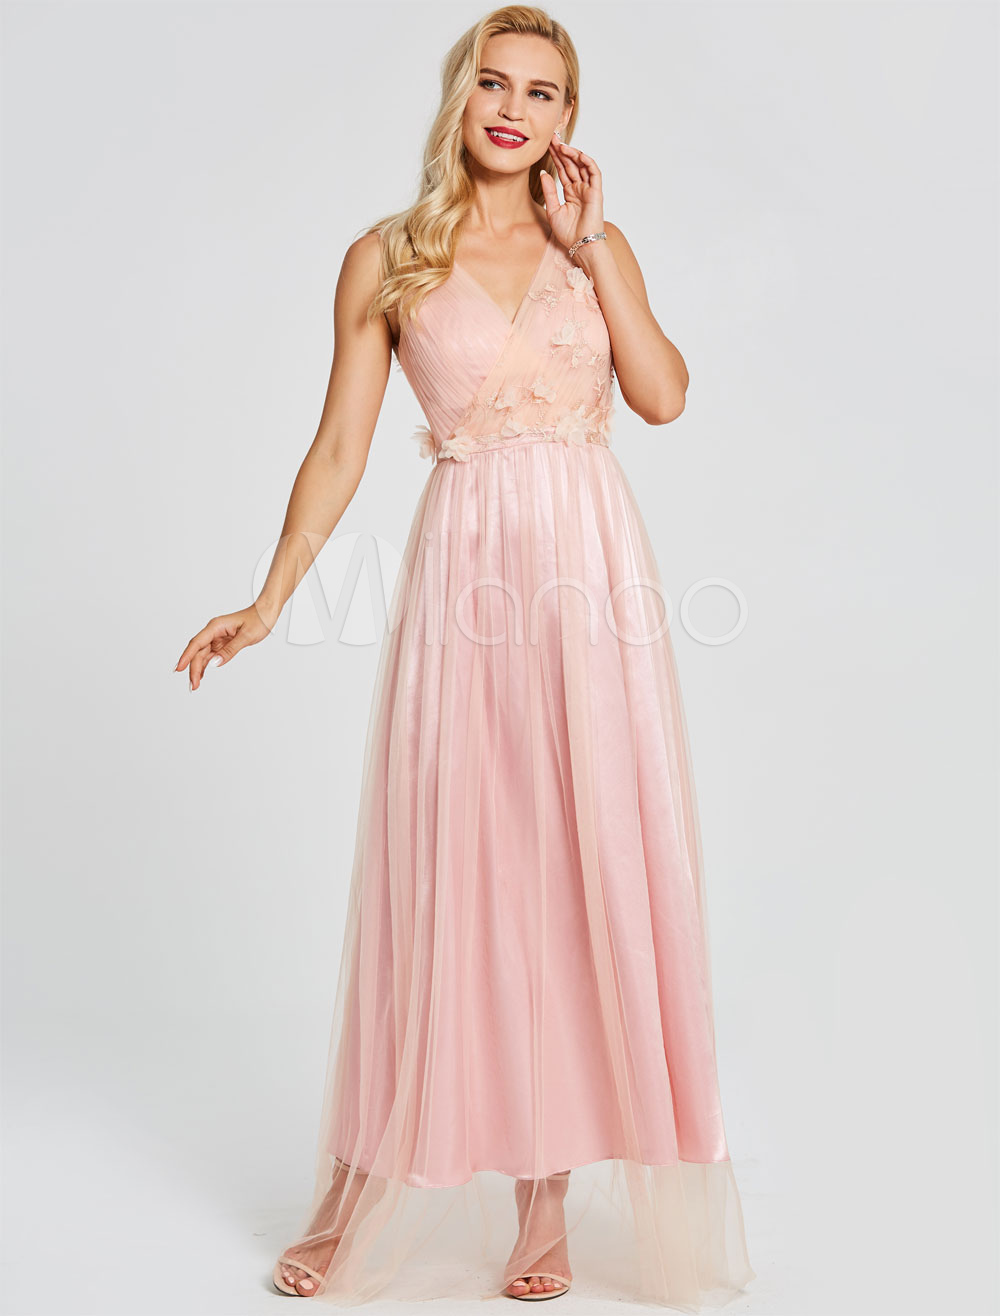 Prom Dresses Long Soft Pink Formal Gowns V Neck Applique Ankle Length Party Dresses (Wedding Cheap Party Dress) photo